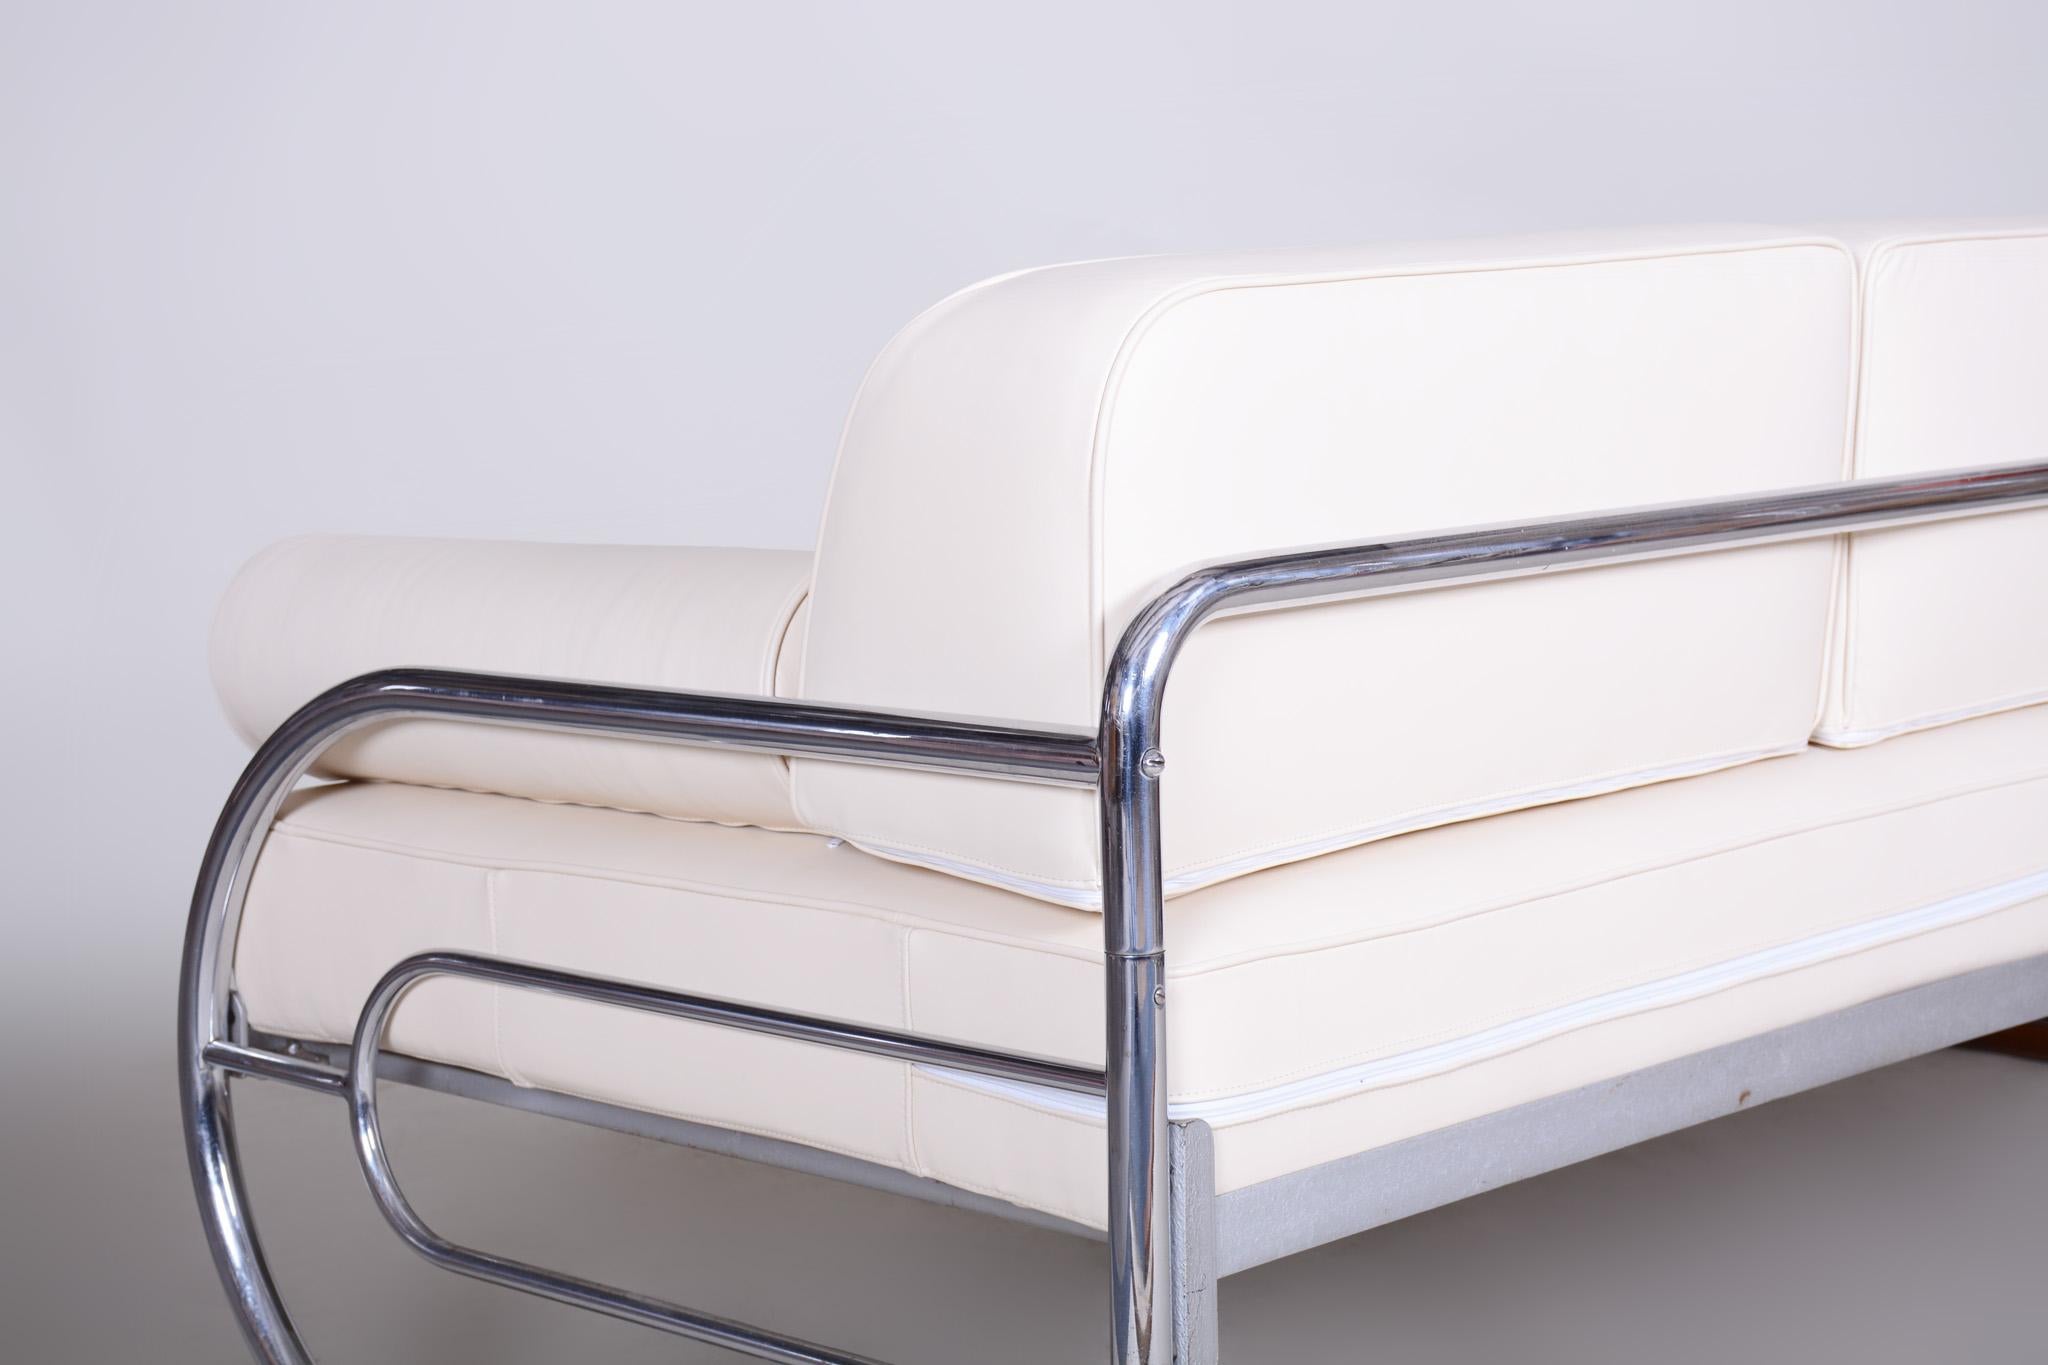 Bauhaus style sofa with a lacquered wood and chrome tubular steel frame.
Manufactured by Robert Slezák in the 1930s.
Chrome tubular steel is in perfect original condition.
Upholstered to high quality white leather.
Source: Czechia